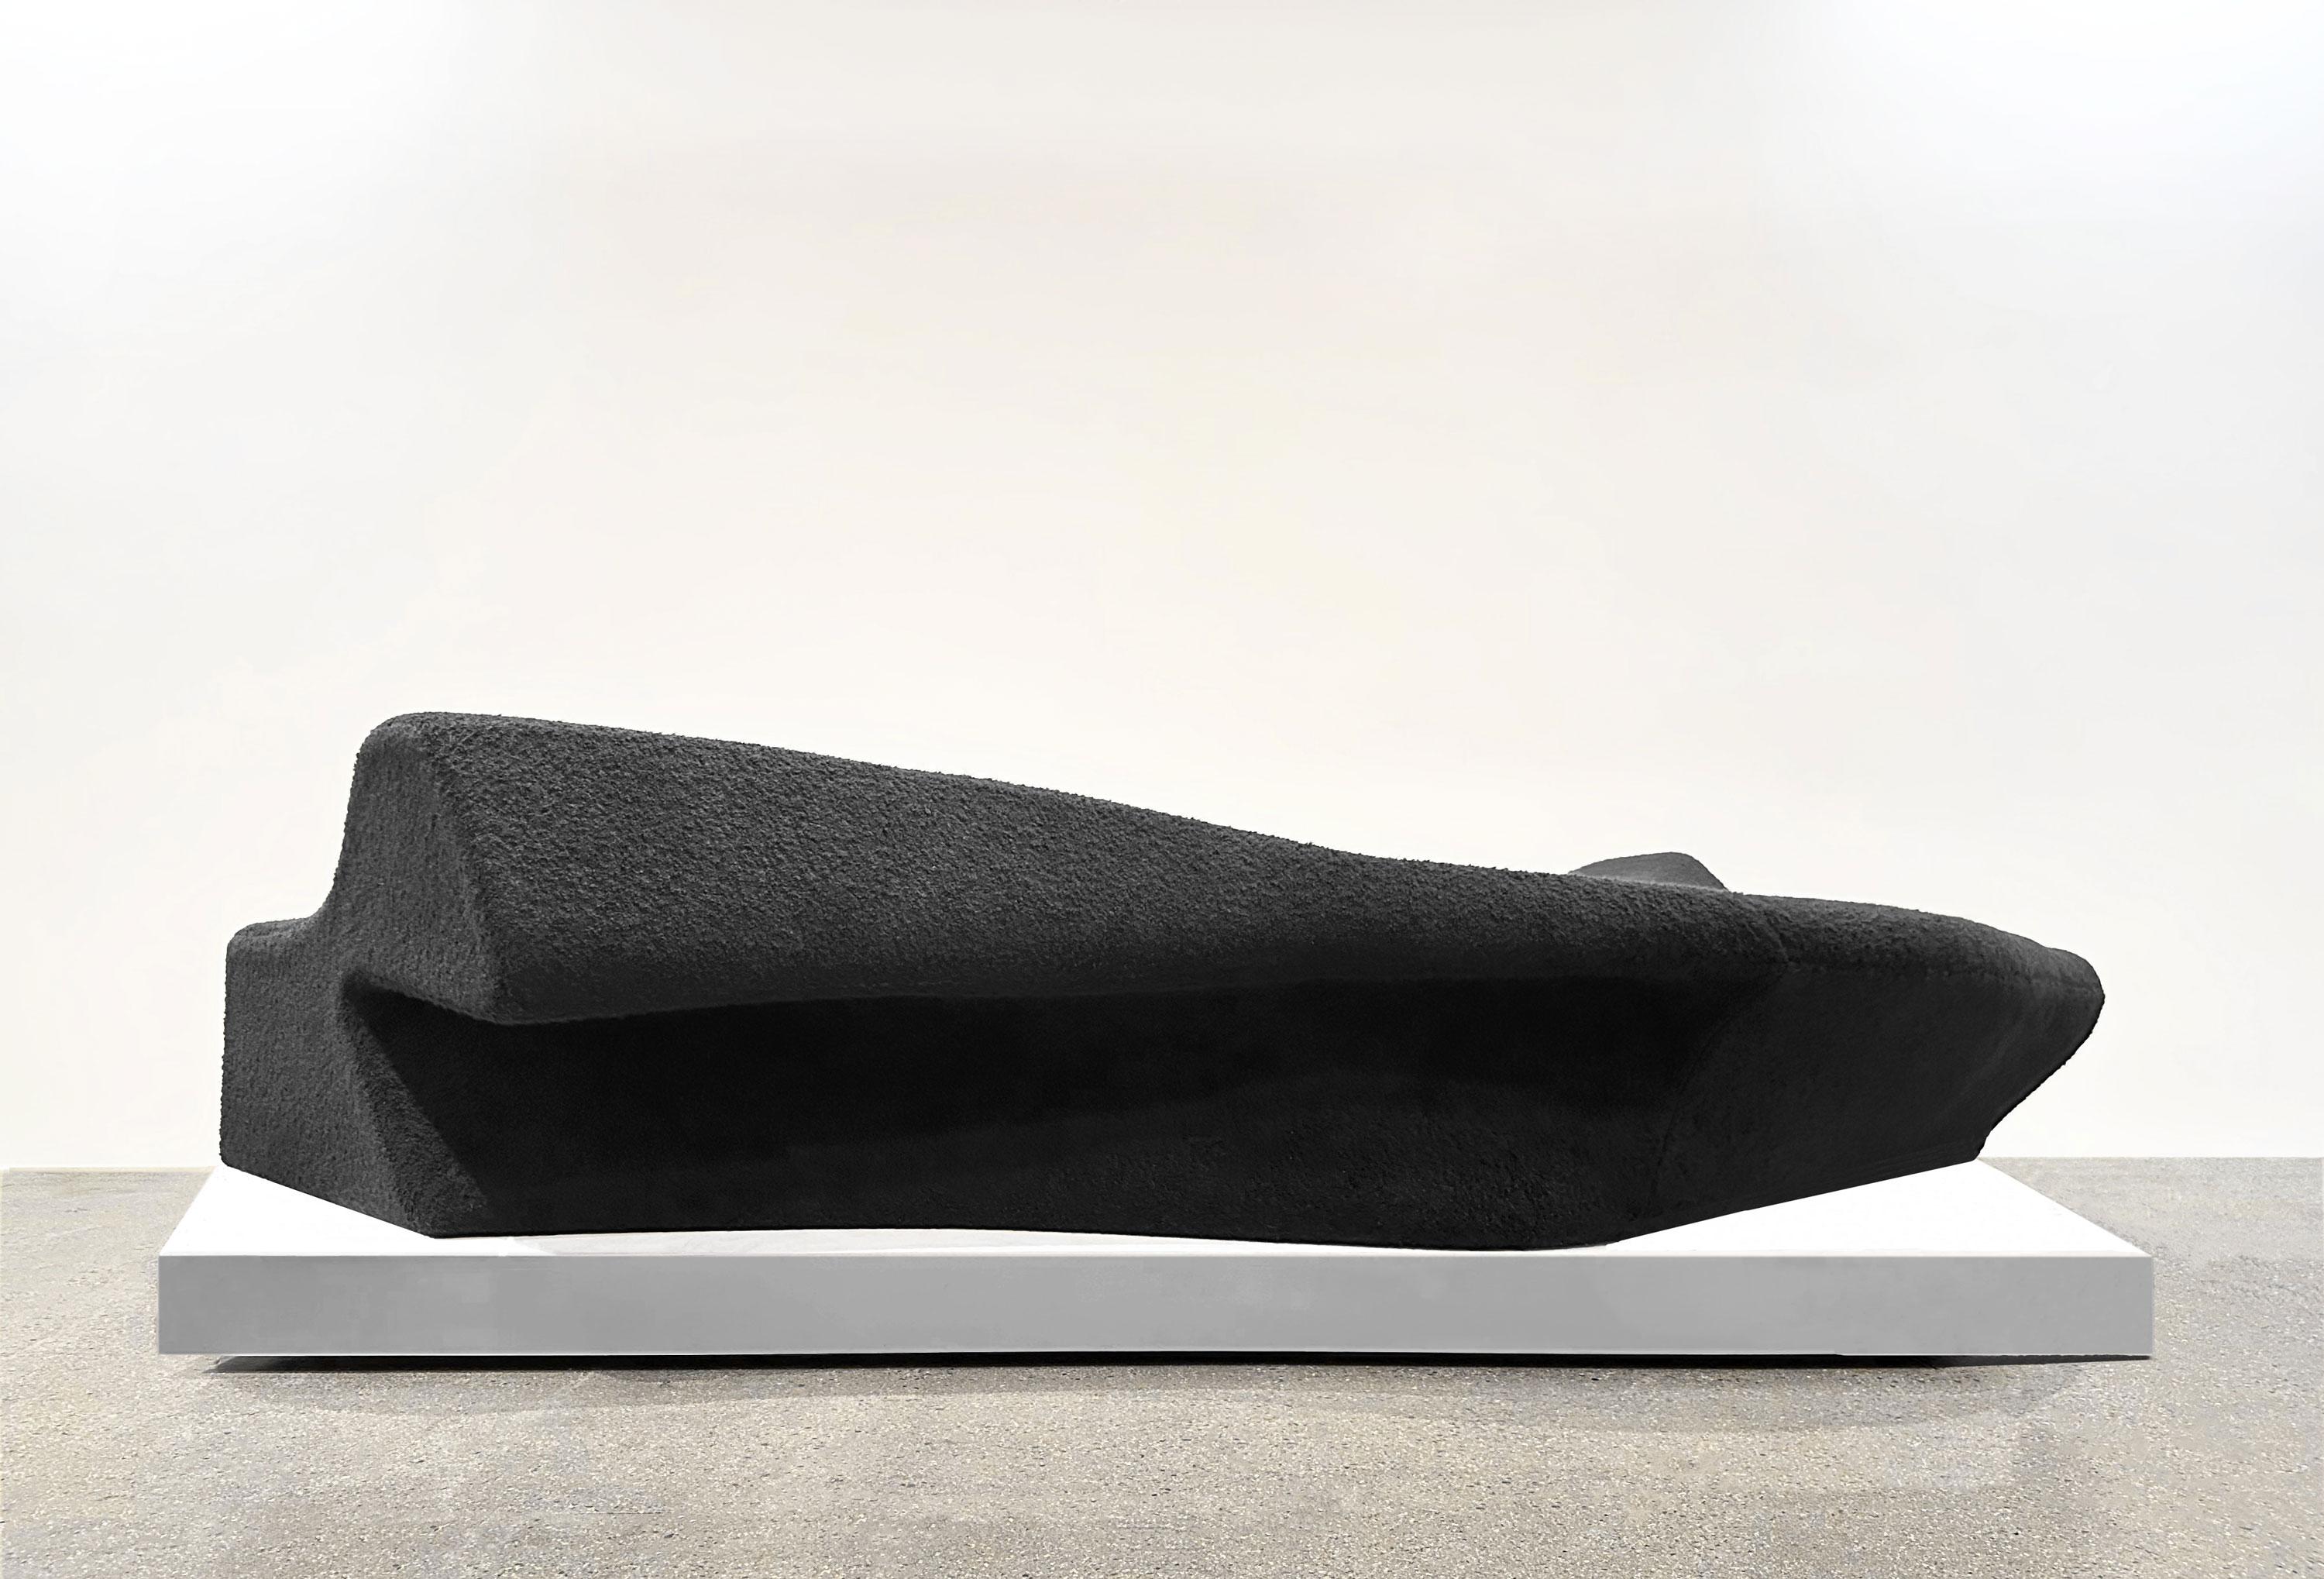 This incredible and rare biomorphic sofa is by Zaha Hadid for Milano Italy based maker Sawaya & Moroni. Named 'Moraine', this double sided curved sofa from the Z-Scape series is reupholstered Sandra Jordan Prima Alpaca Solid - Ebony color. The wild